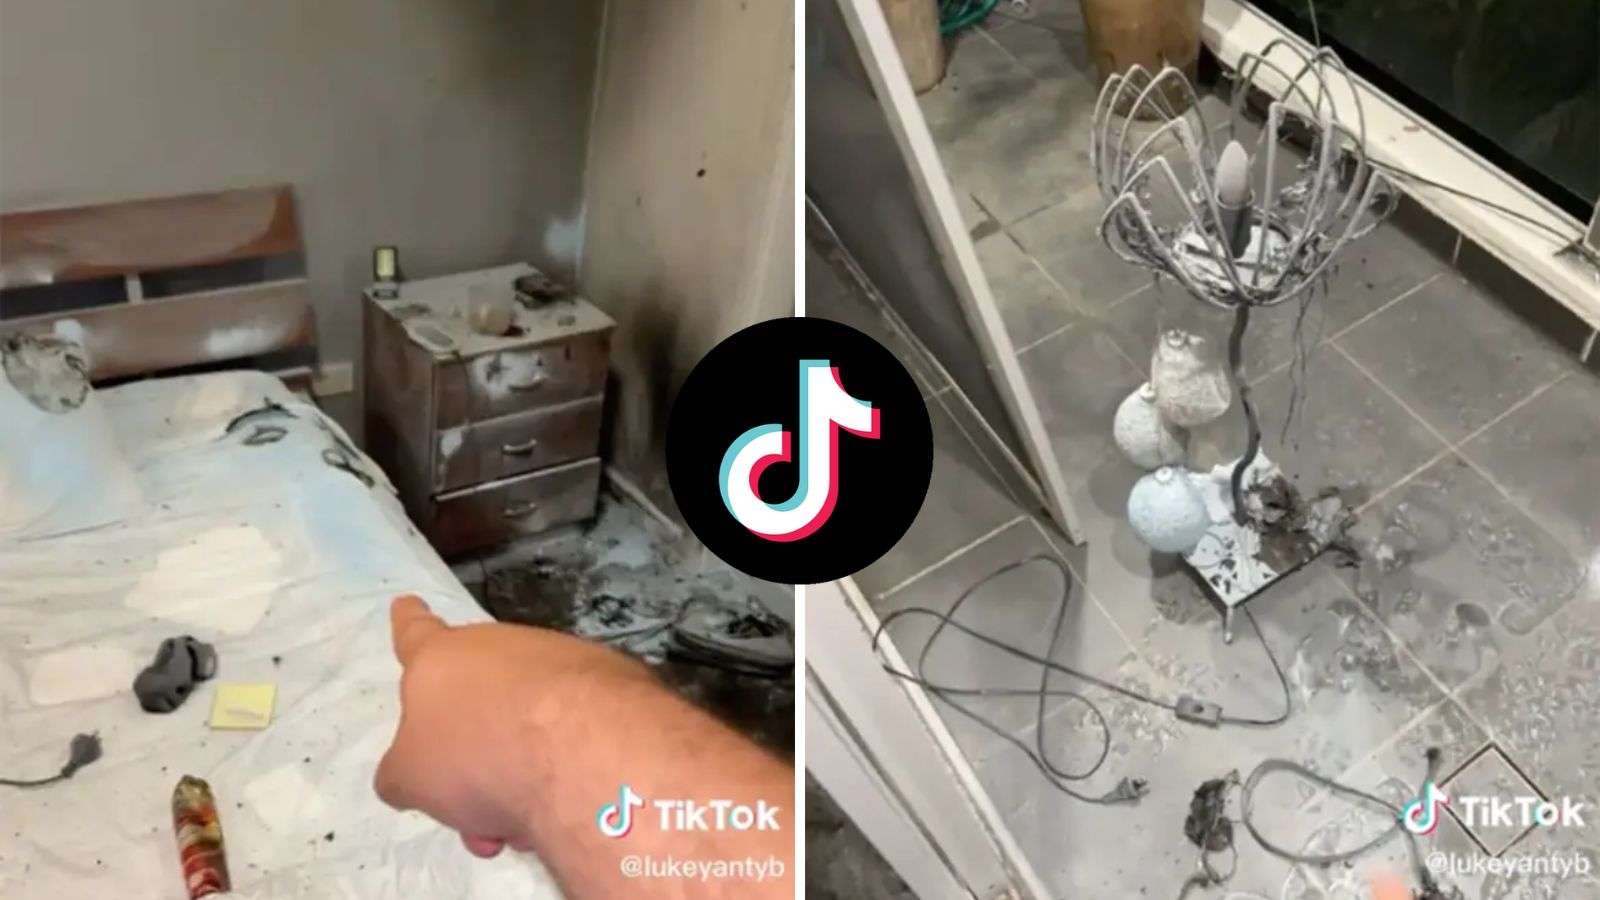 Man claims dry shampoo can exploded and set his house on fire